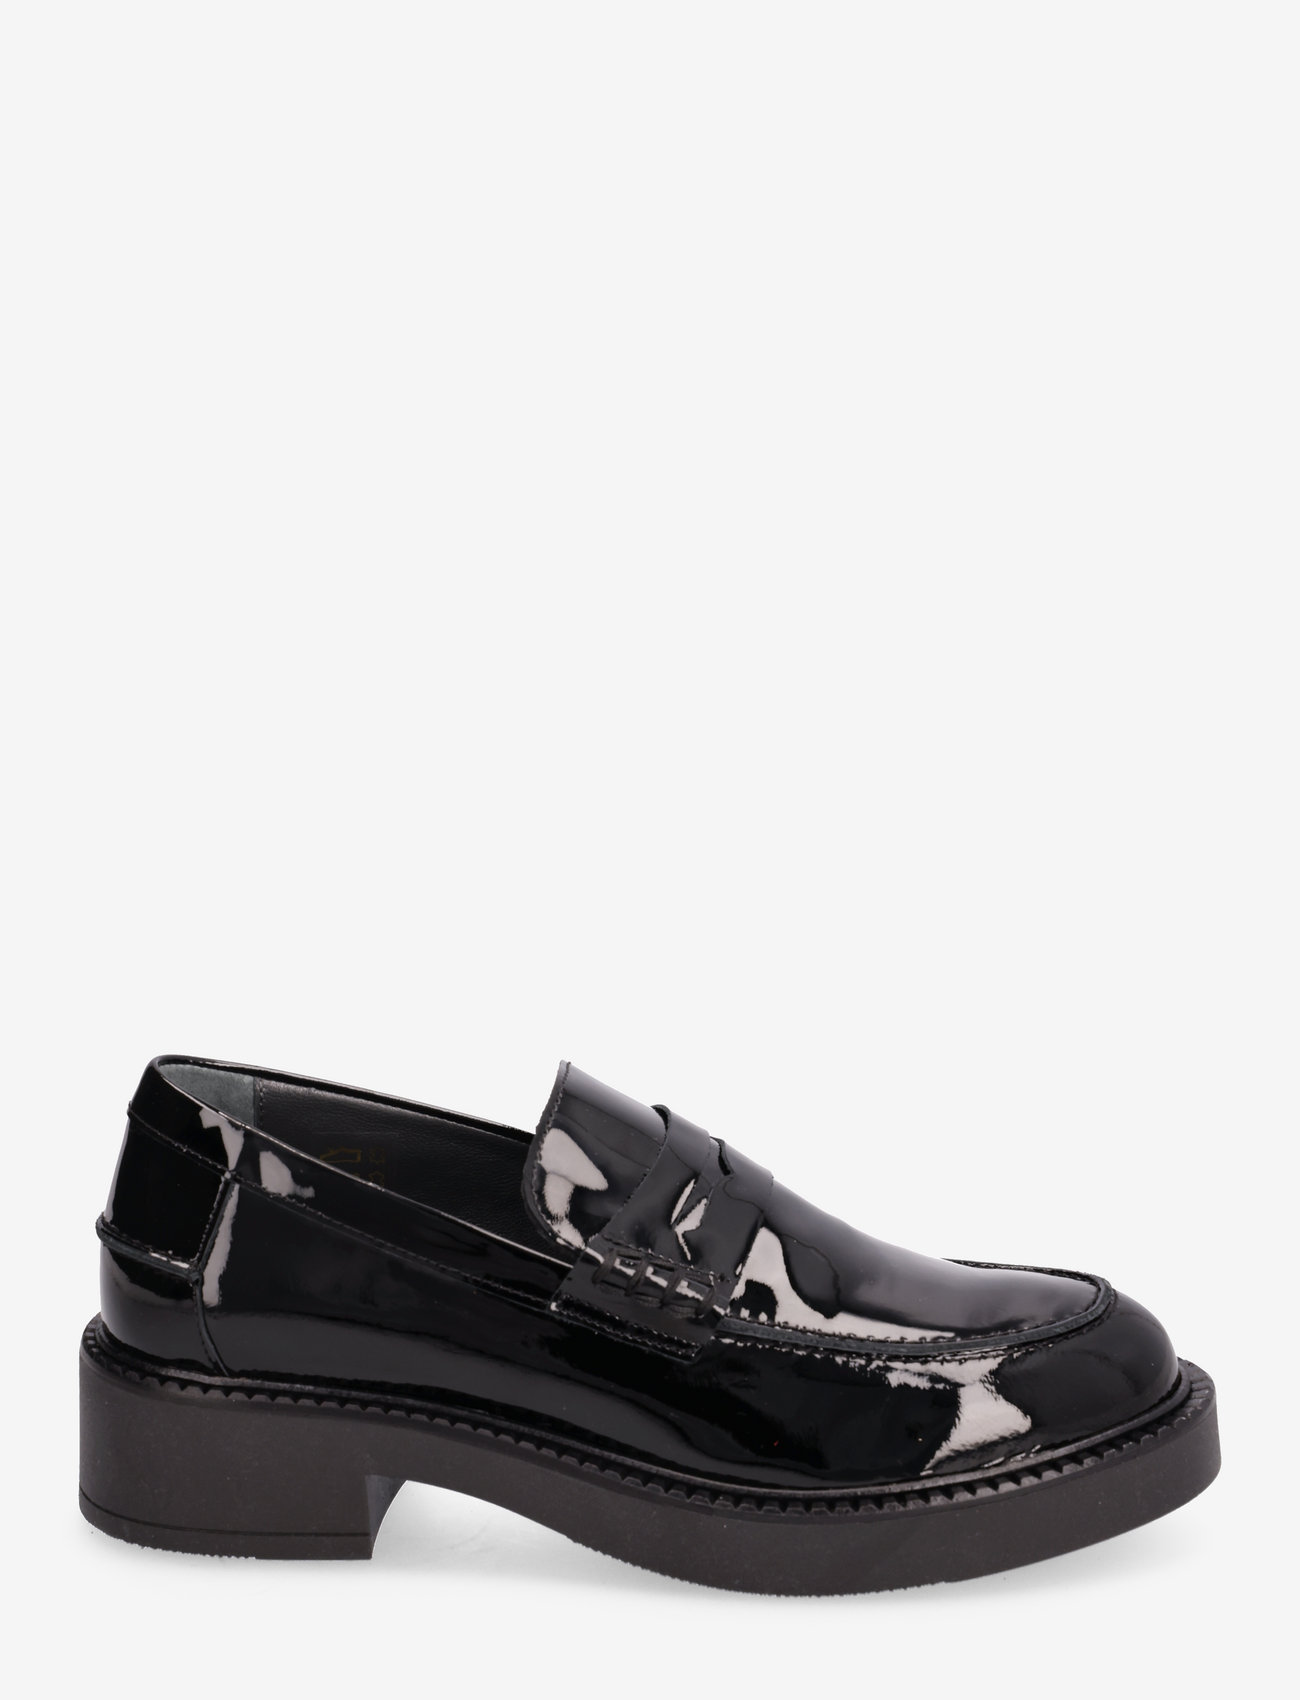 ANGULUS - Loafer - birthday gifts - 2320 black - 1